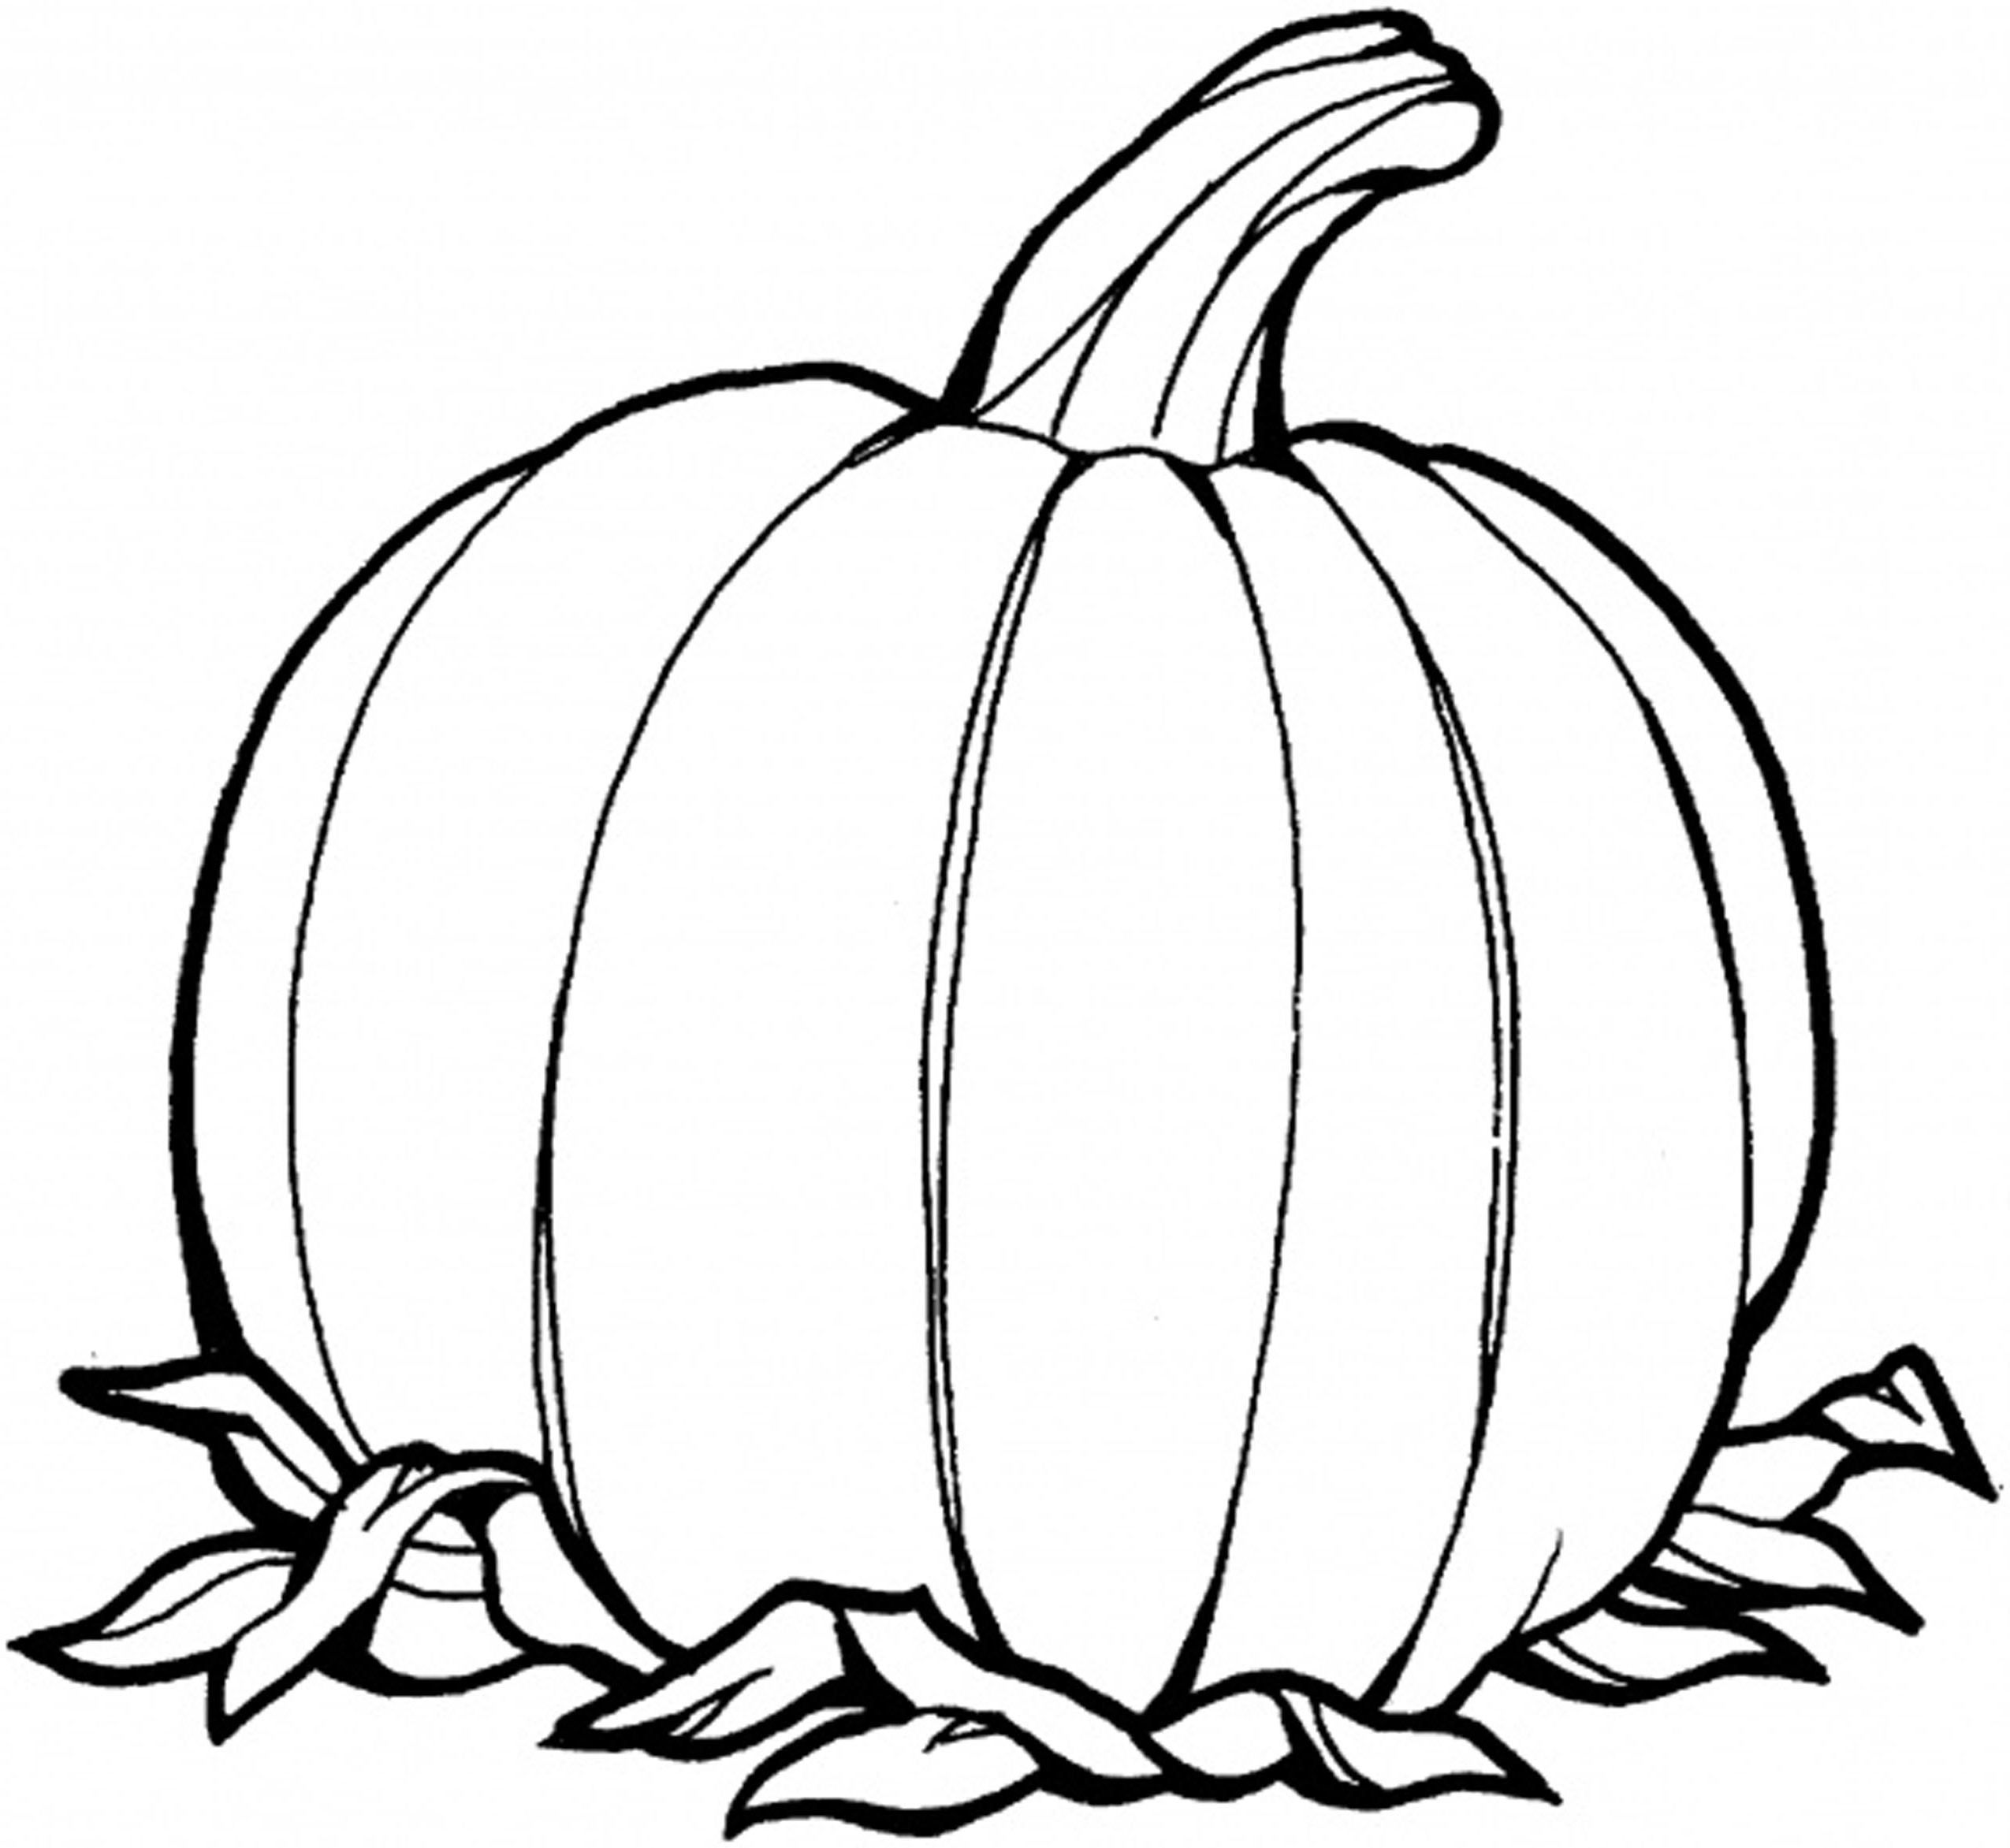 Related Pumpkin Coloring Pages item-1302, Pumpkin Coloring Pages ...